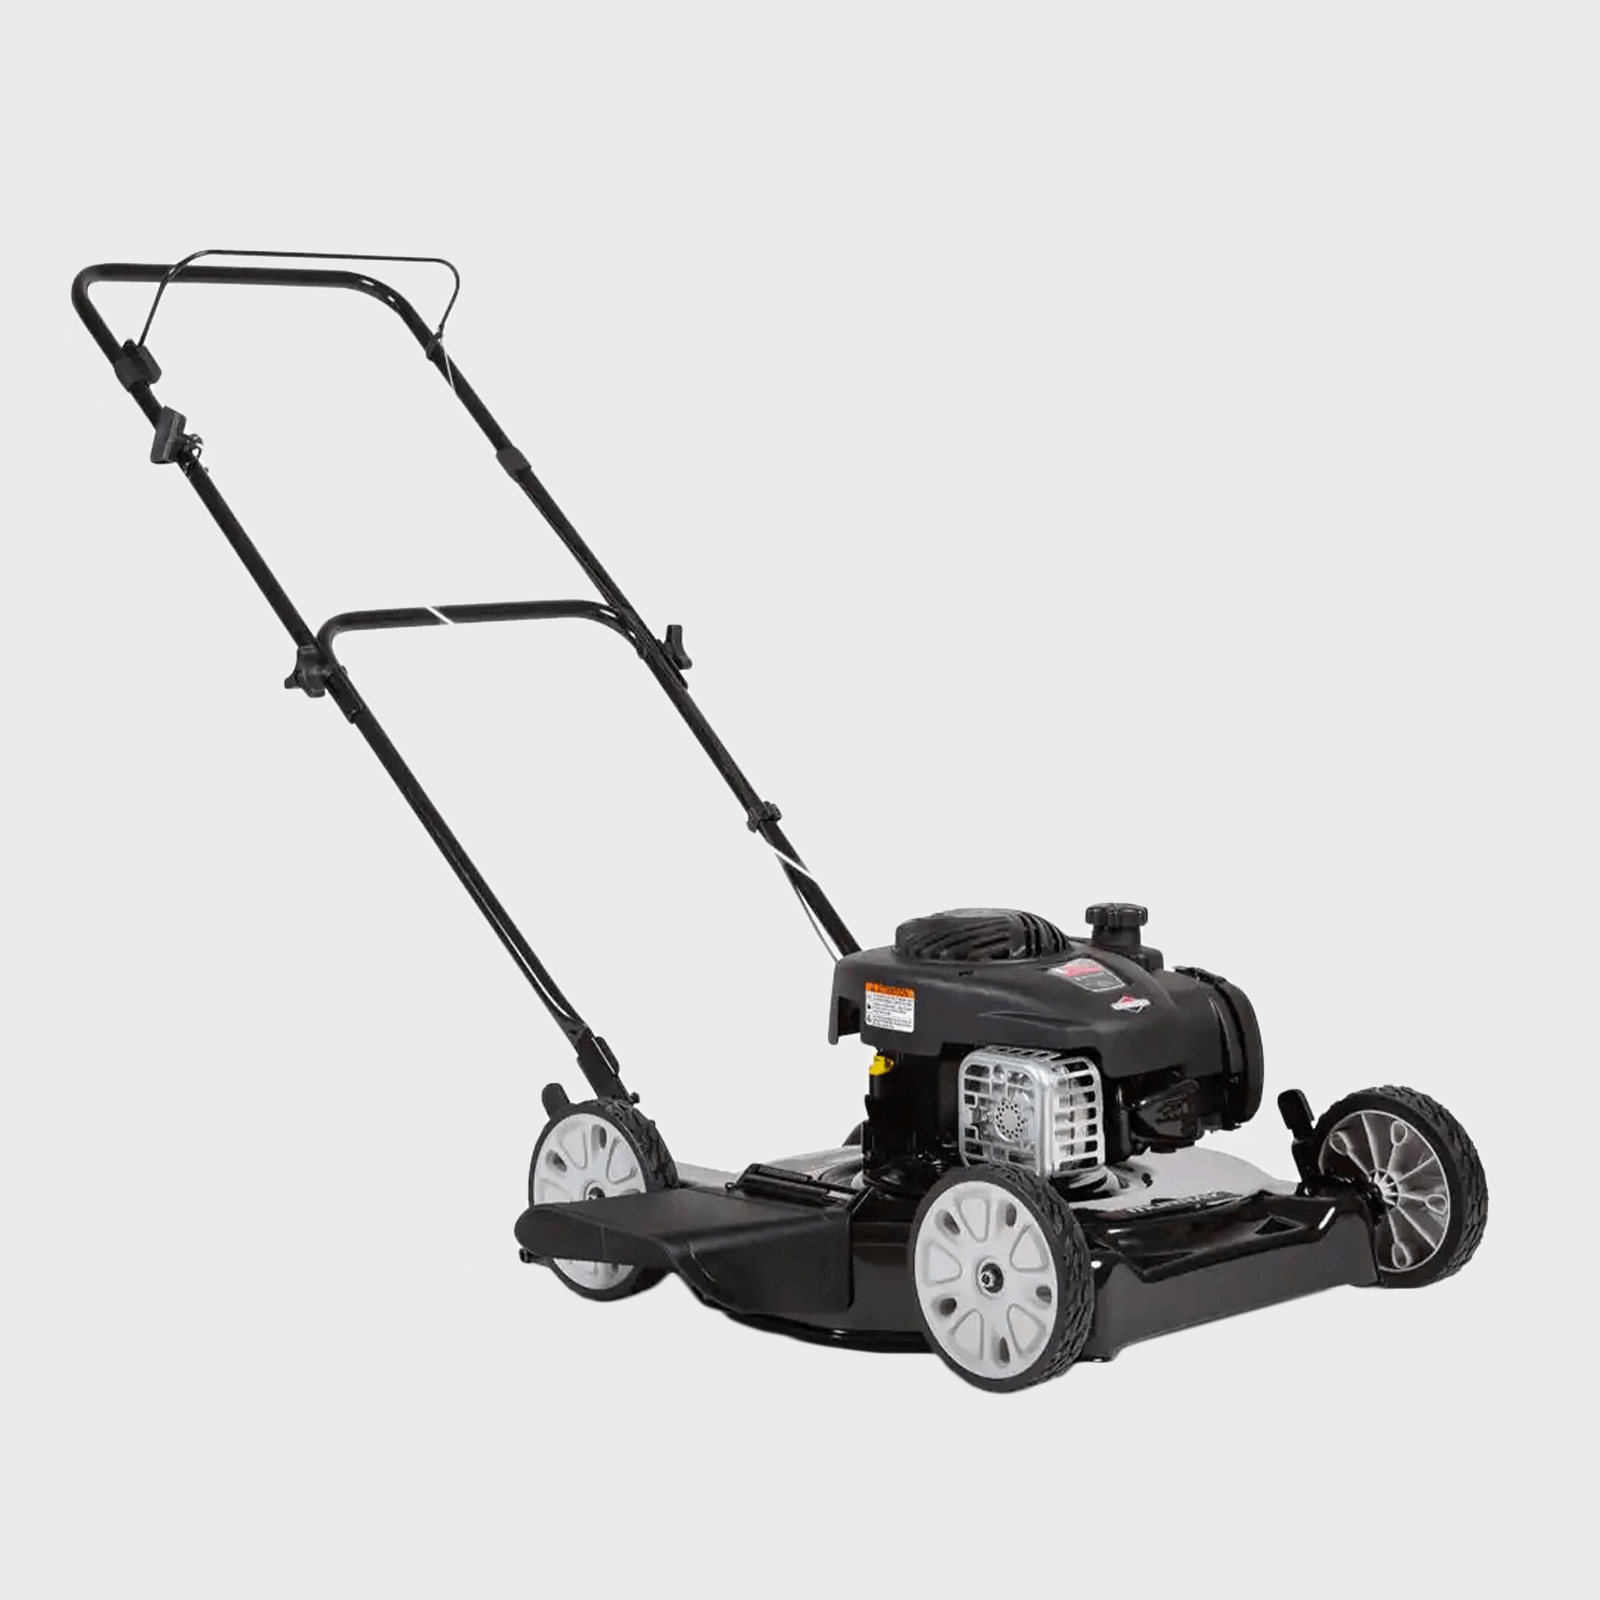 The Best Gas Lawn Mowers The Family Handyman